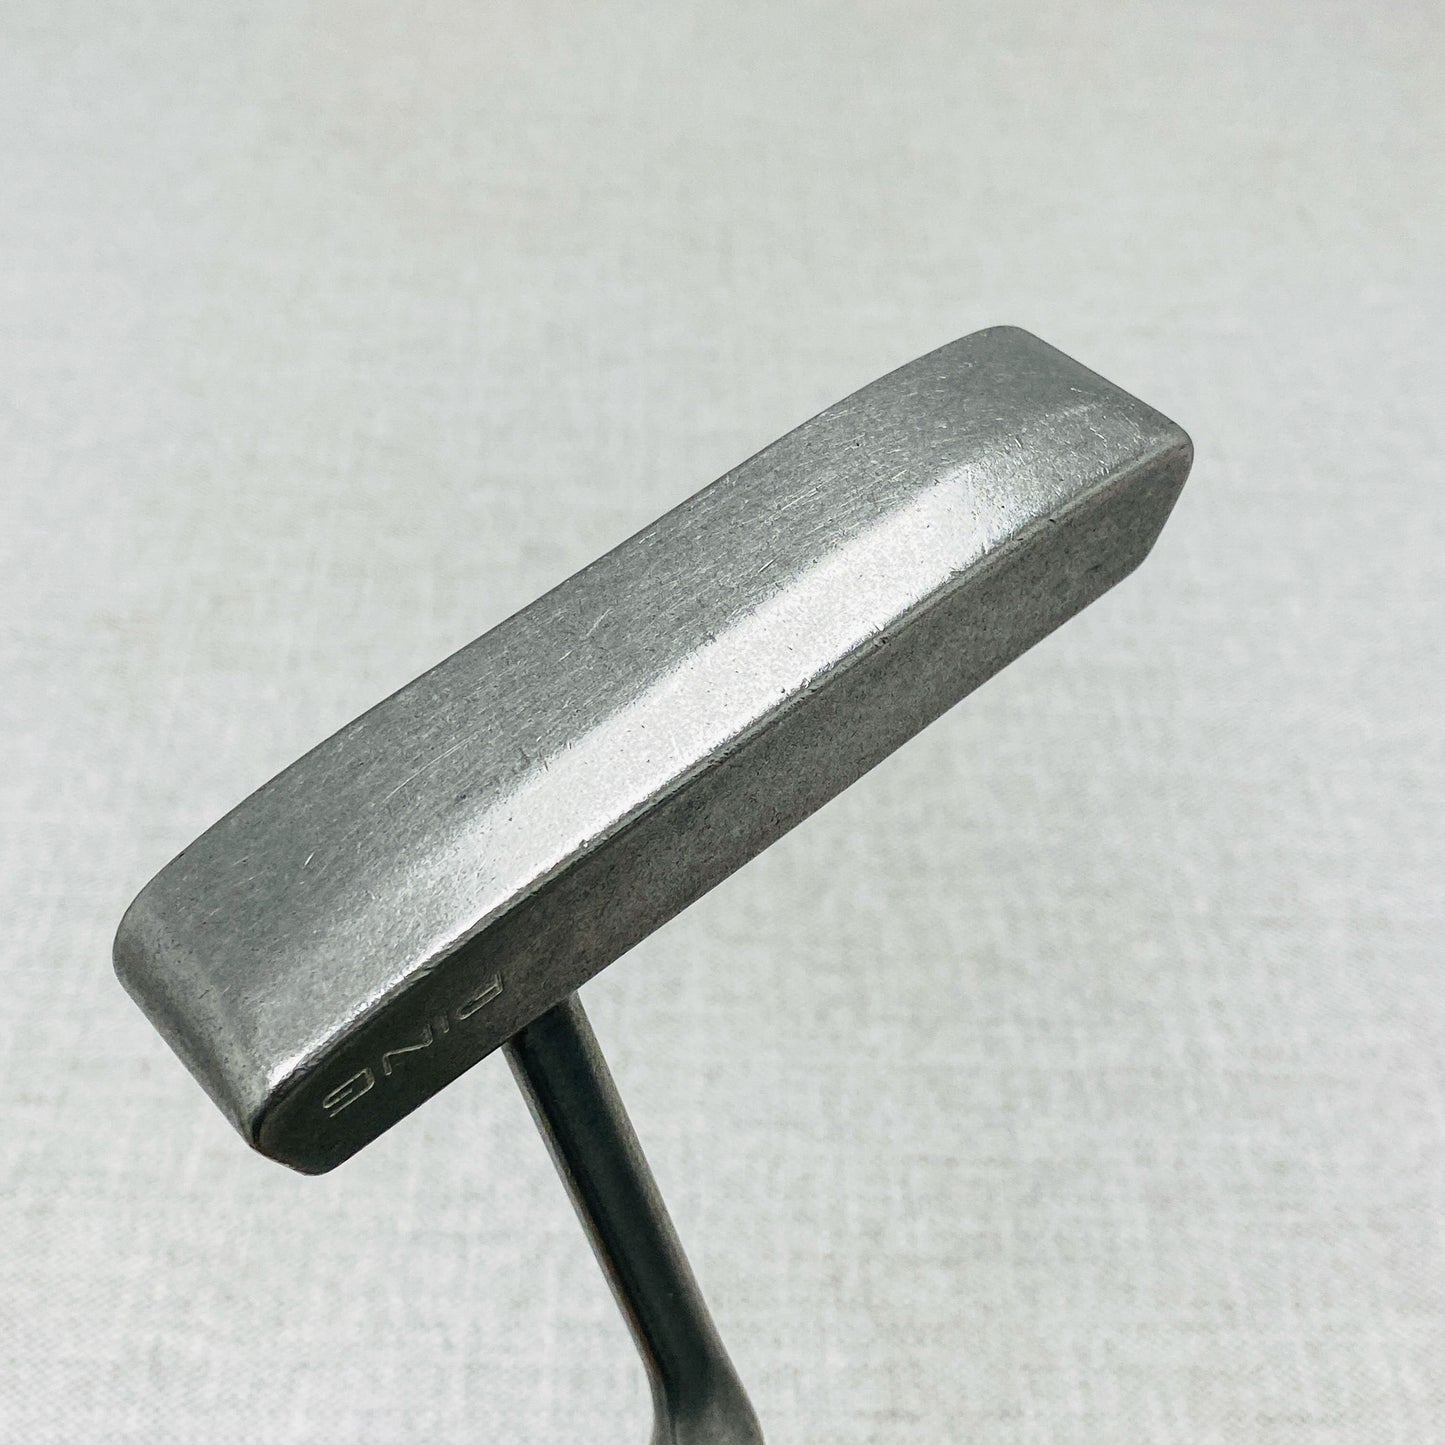 PING Pal 5KS Stainless Putter. 36 inch - Very Good Condition # T1014